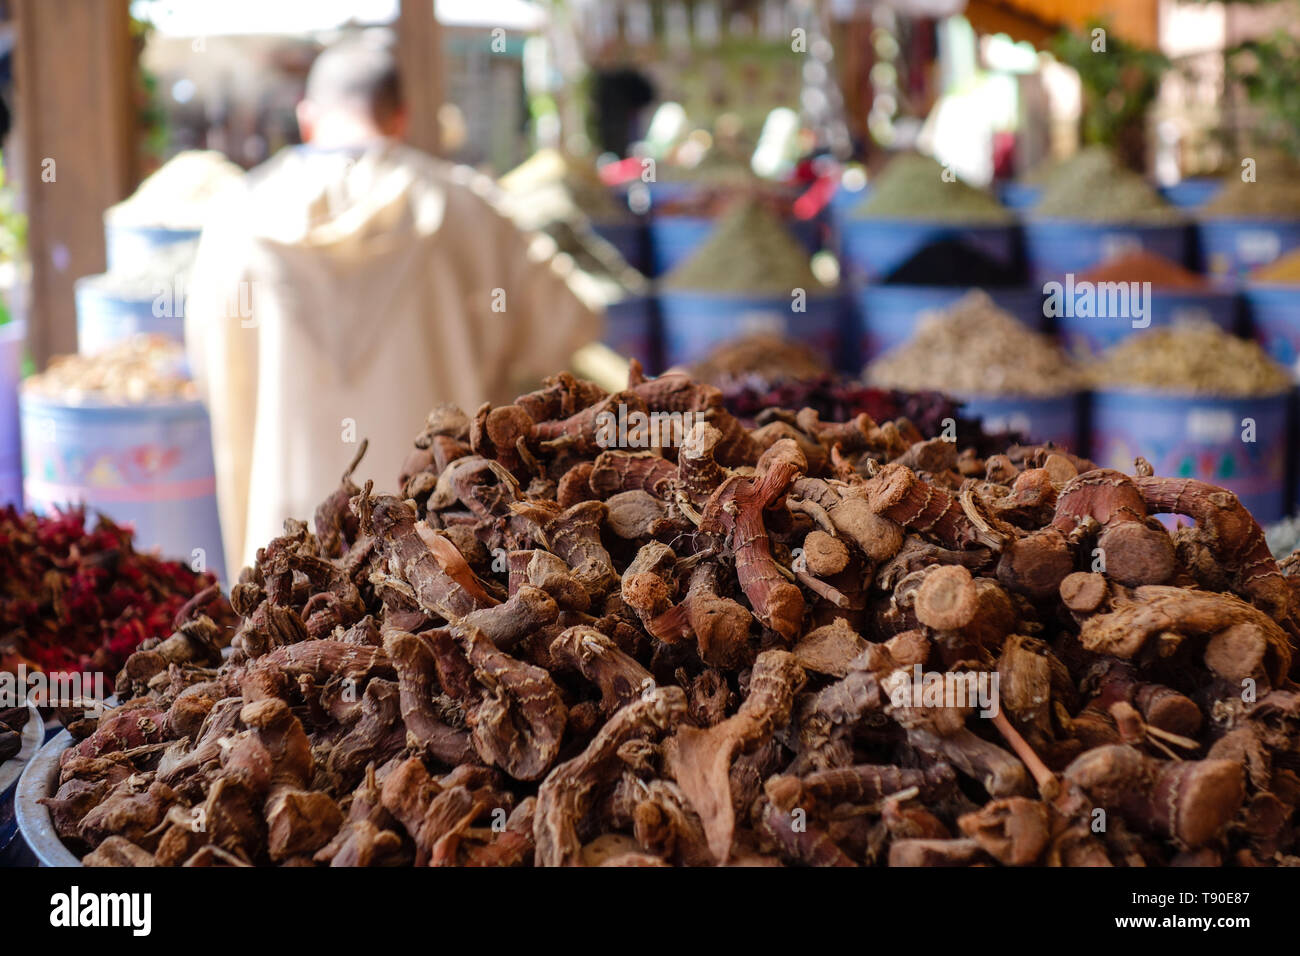 Pile of dried ginseng roots in a traditional spice shop on the bazaar in Marrakesh, Morocco Stock Photo